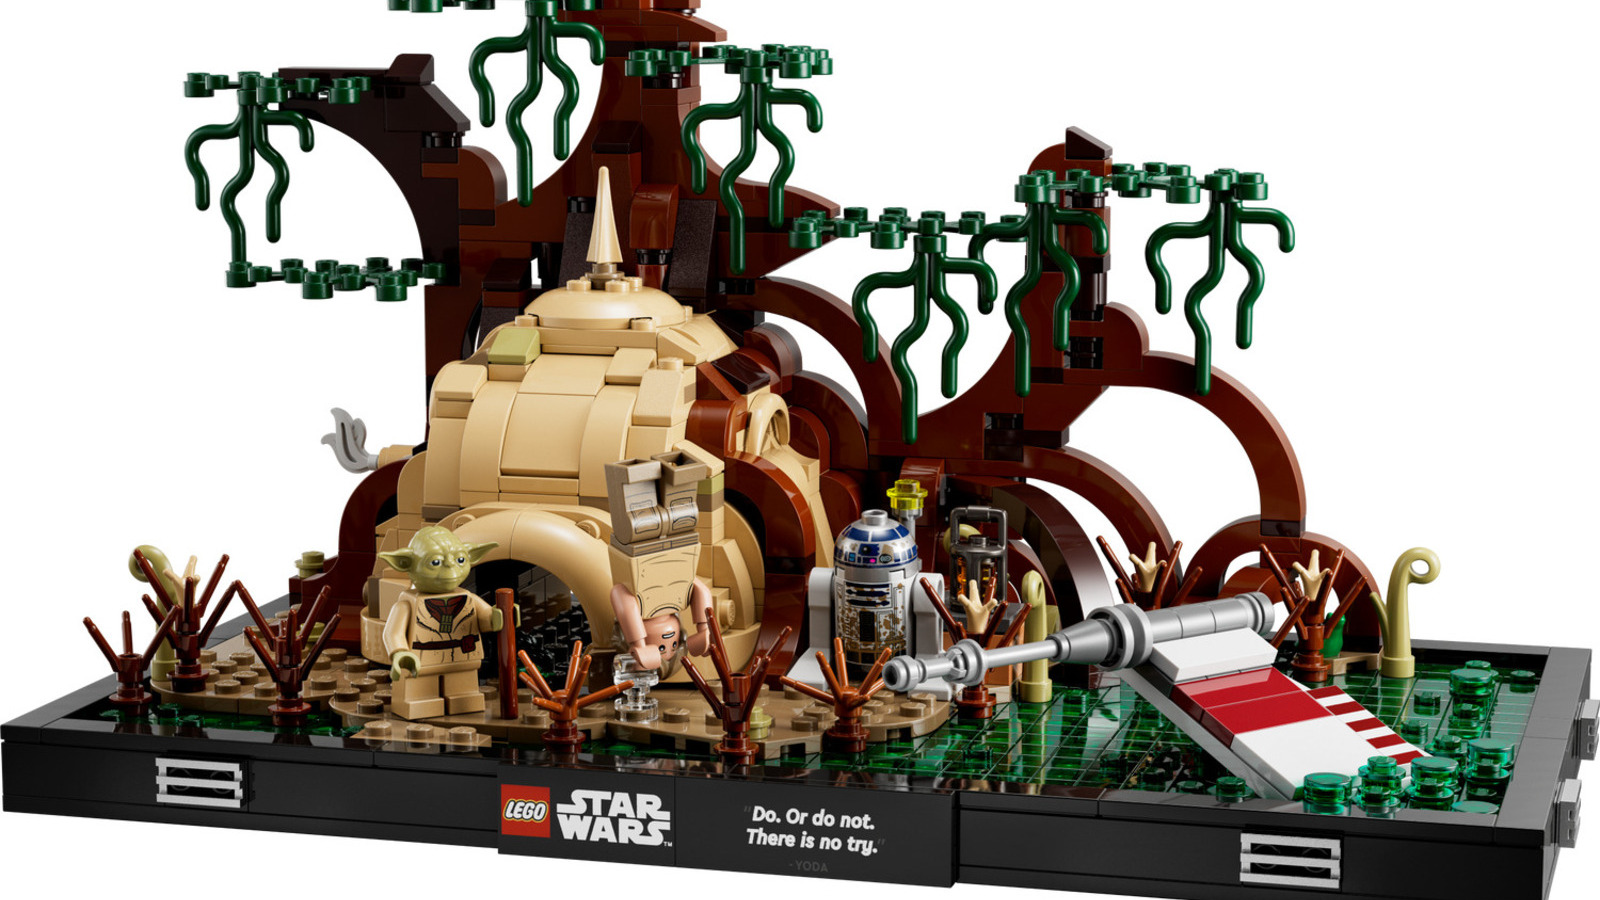 Star Wars: Luke's epic training on Dagobah LEGO set is on Amazon with an unmissable offer